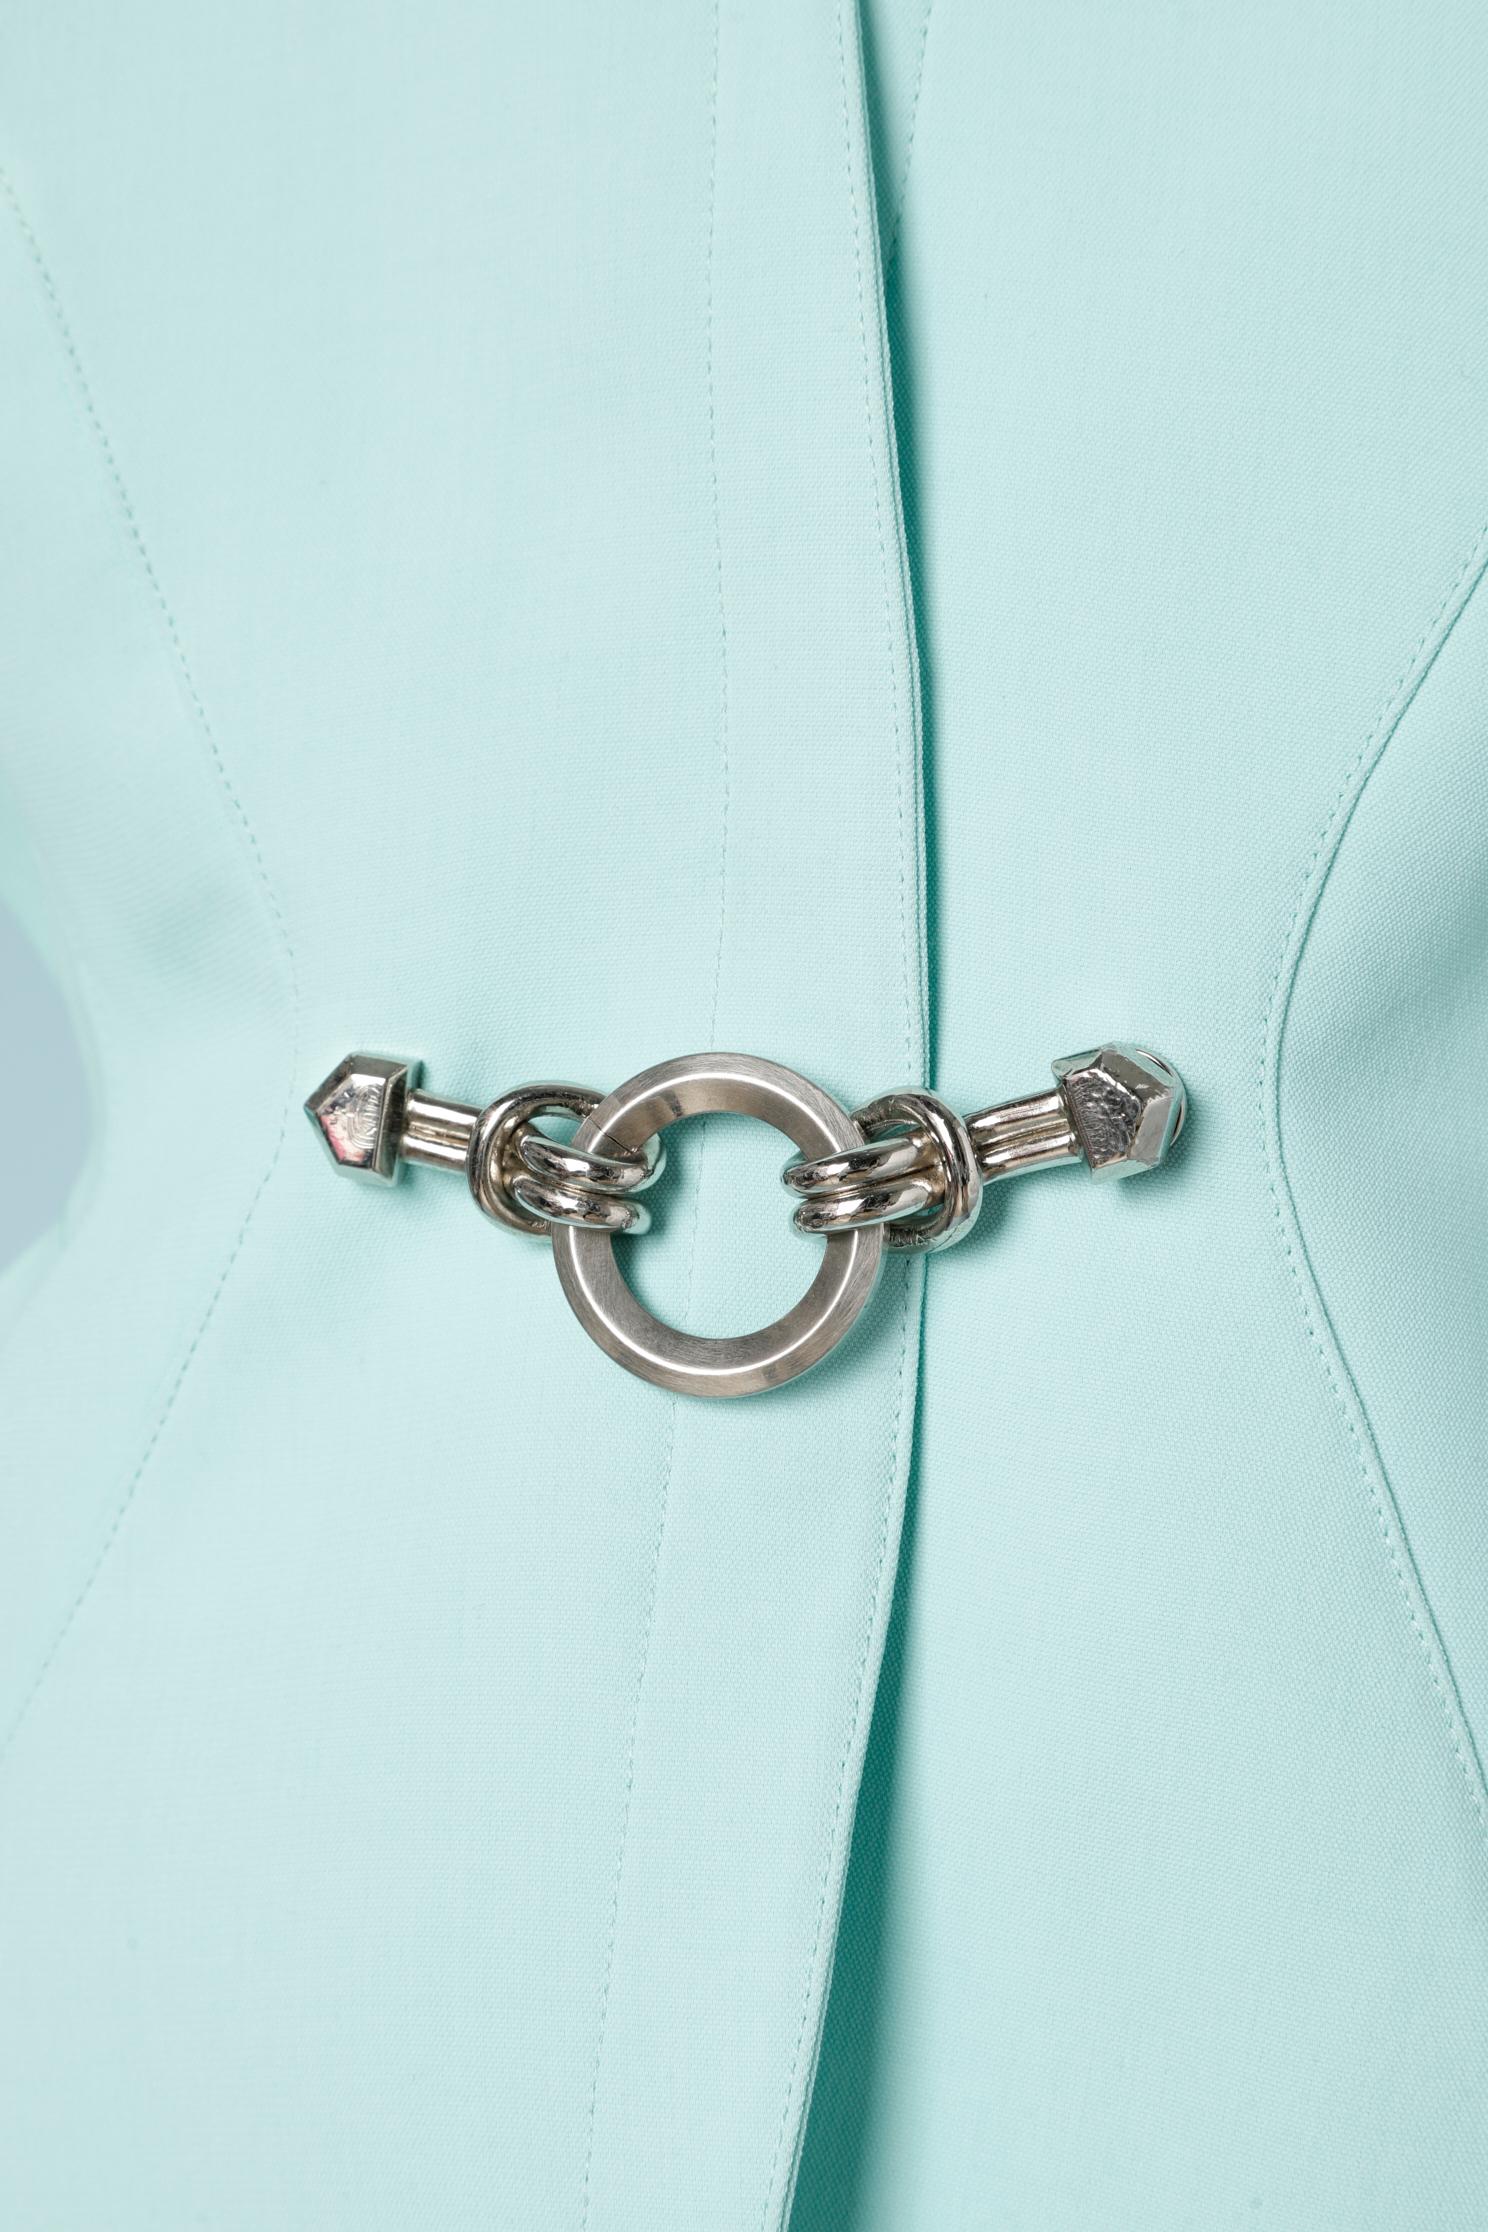 Mint skirt- suit with metal embellishment.
SIZE: 42 ( Fr)